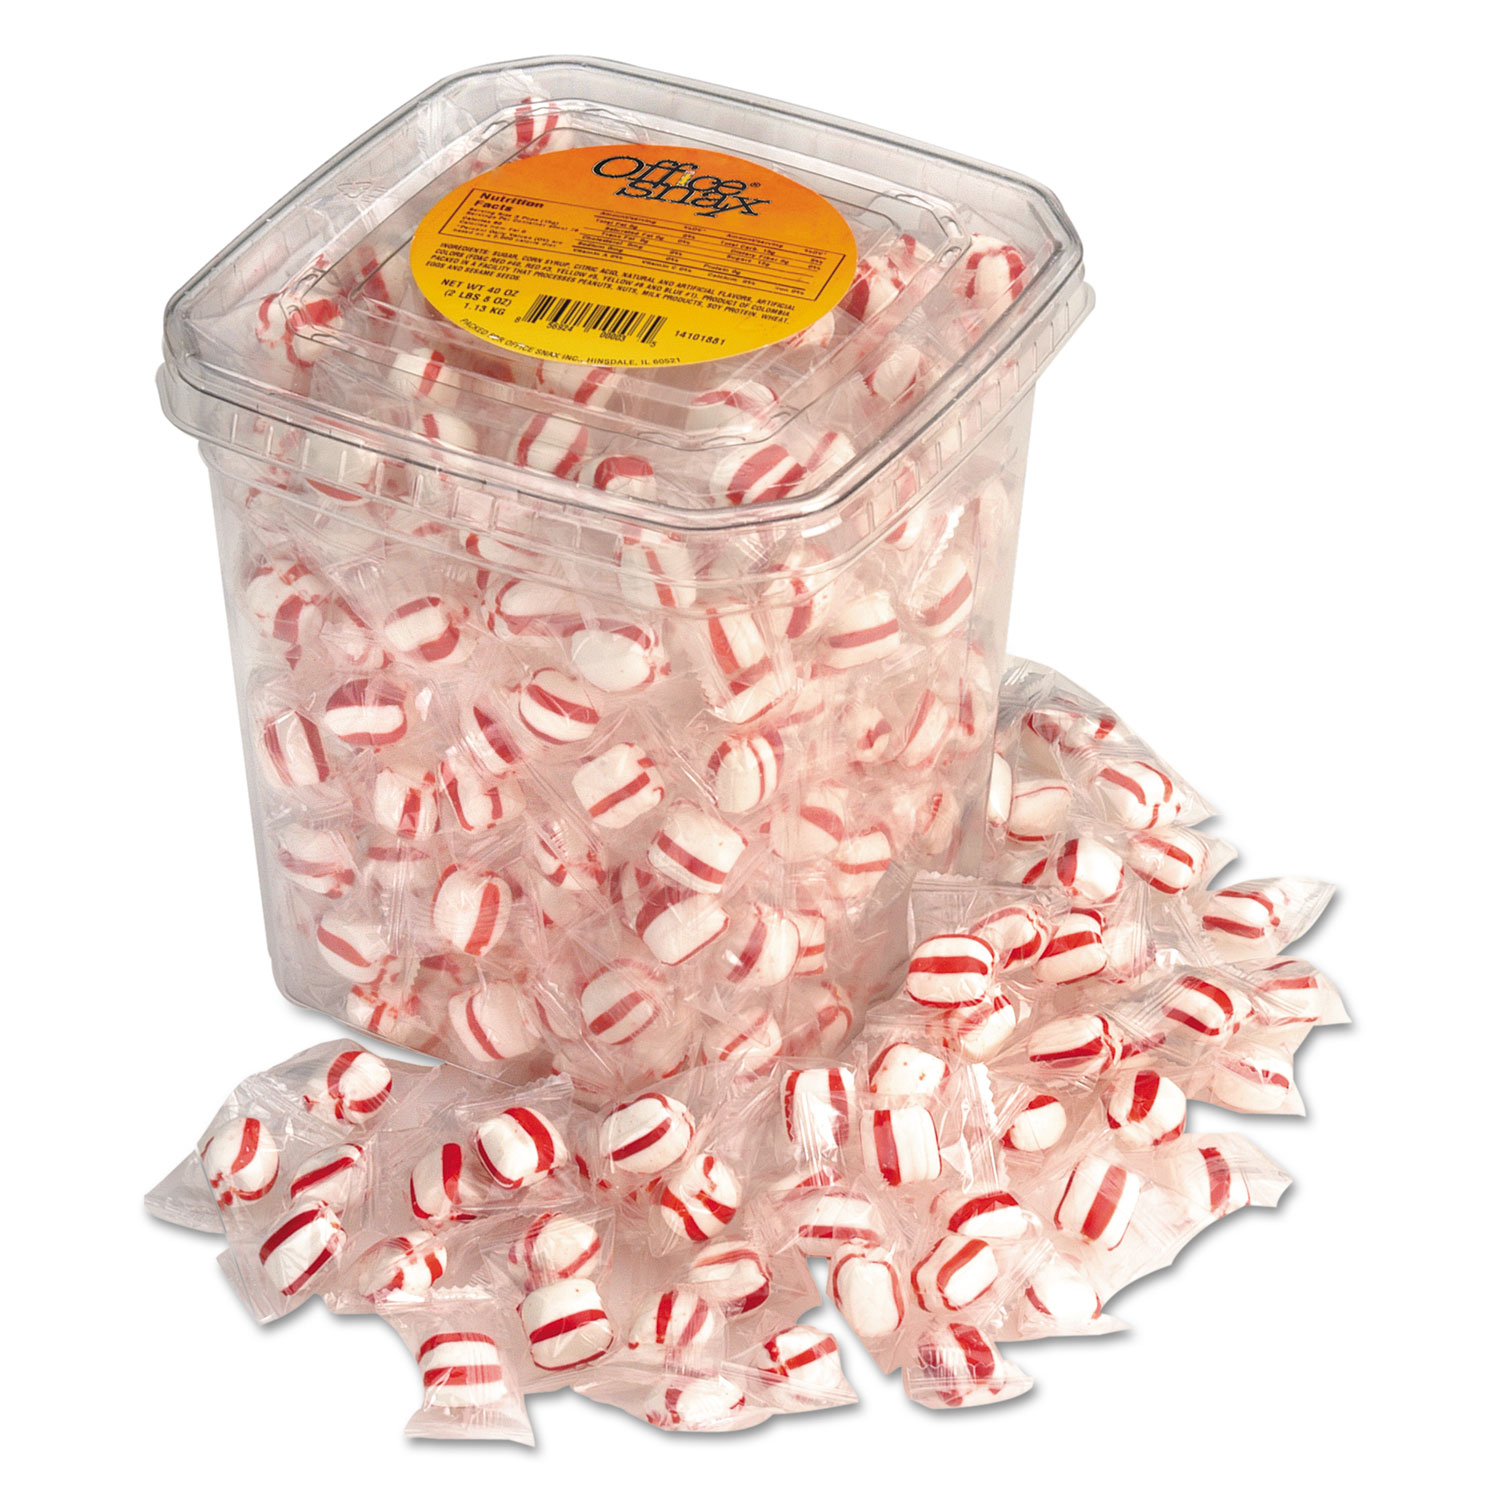  Office Snax 00042 Candy Tubs, Peppermint Puffs, Individually Wrapped, 44oz Resealable Plastic Tub (OFX00042) 